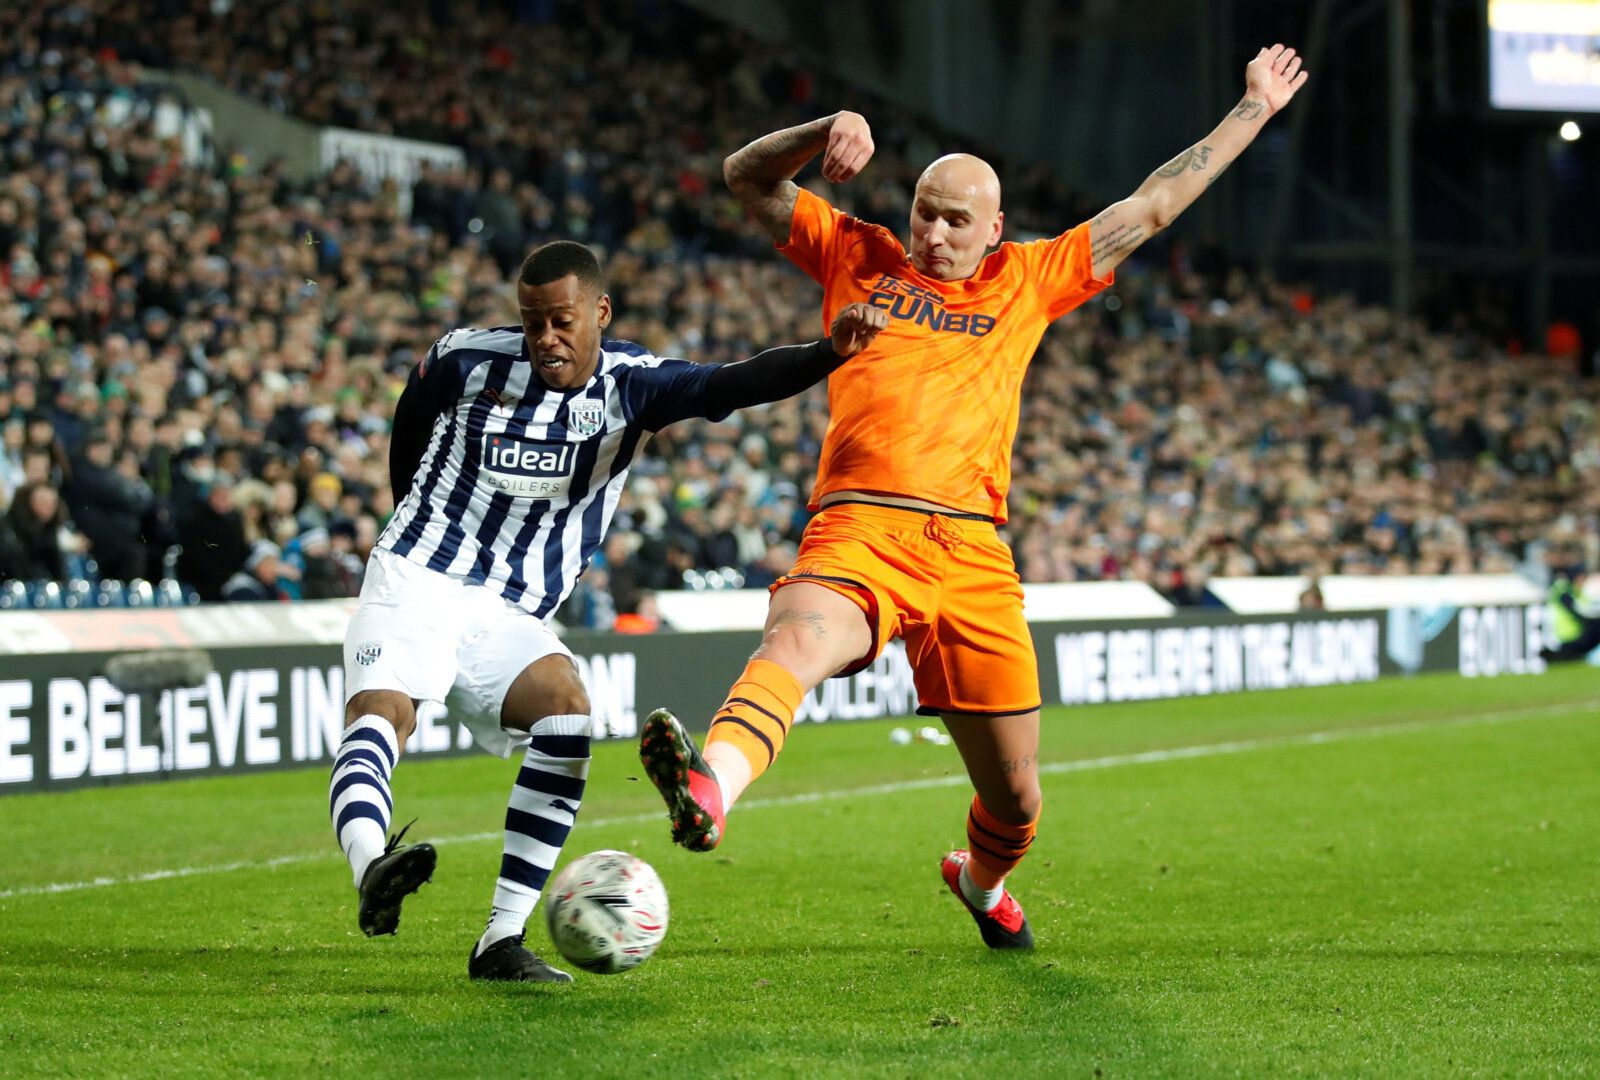 Soccer Football - FA Cup Fifth Round - West Bromwich Albion v Newcastle United - The Hawthorns, West Bromwich, Britain - March 3, 2020  West Bromwich Albion's Rayhaan Tulloch in action with Newcastle United's Jonjo Shelvey   Action Images via Reuters/Andrew Boyers